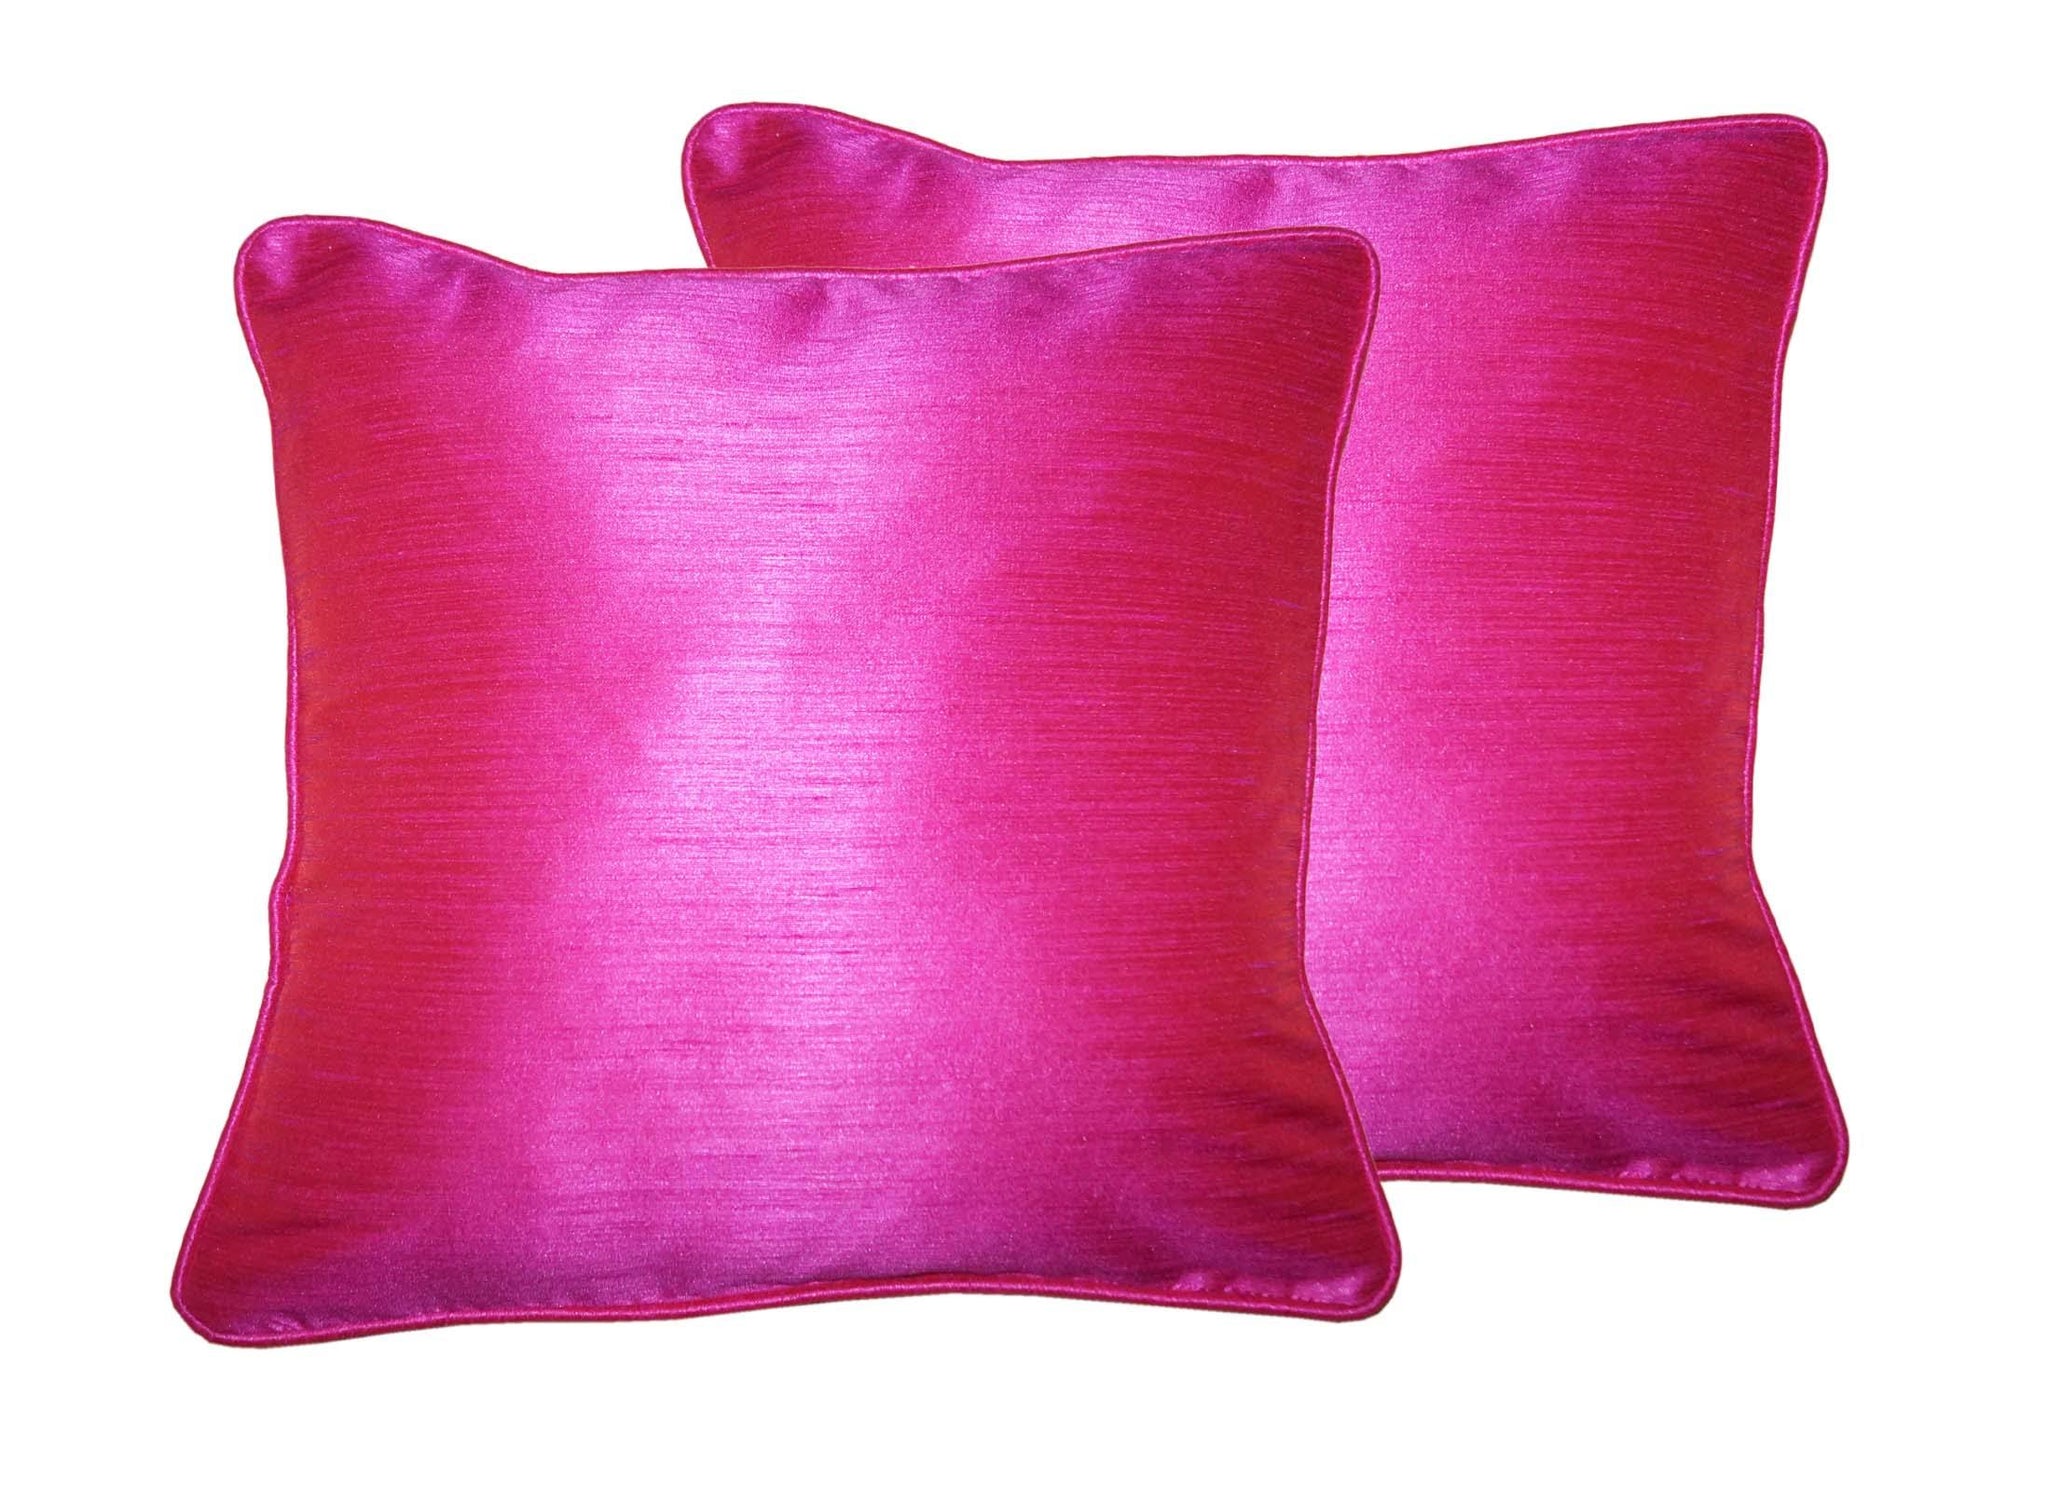 Lushomes Pink Twinkle Star Cushion Covers 12 x 12 Pack of 2 - Lushomes